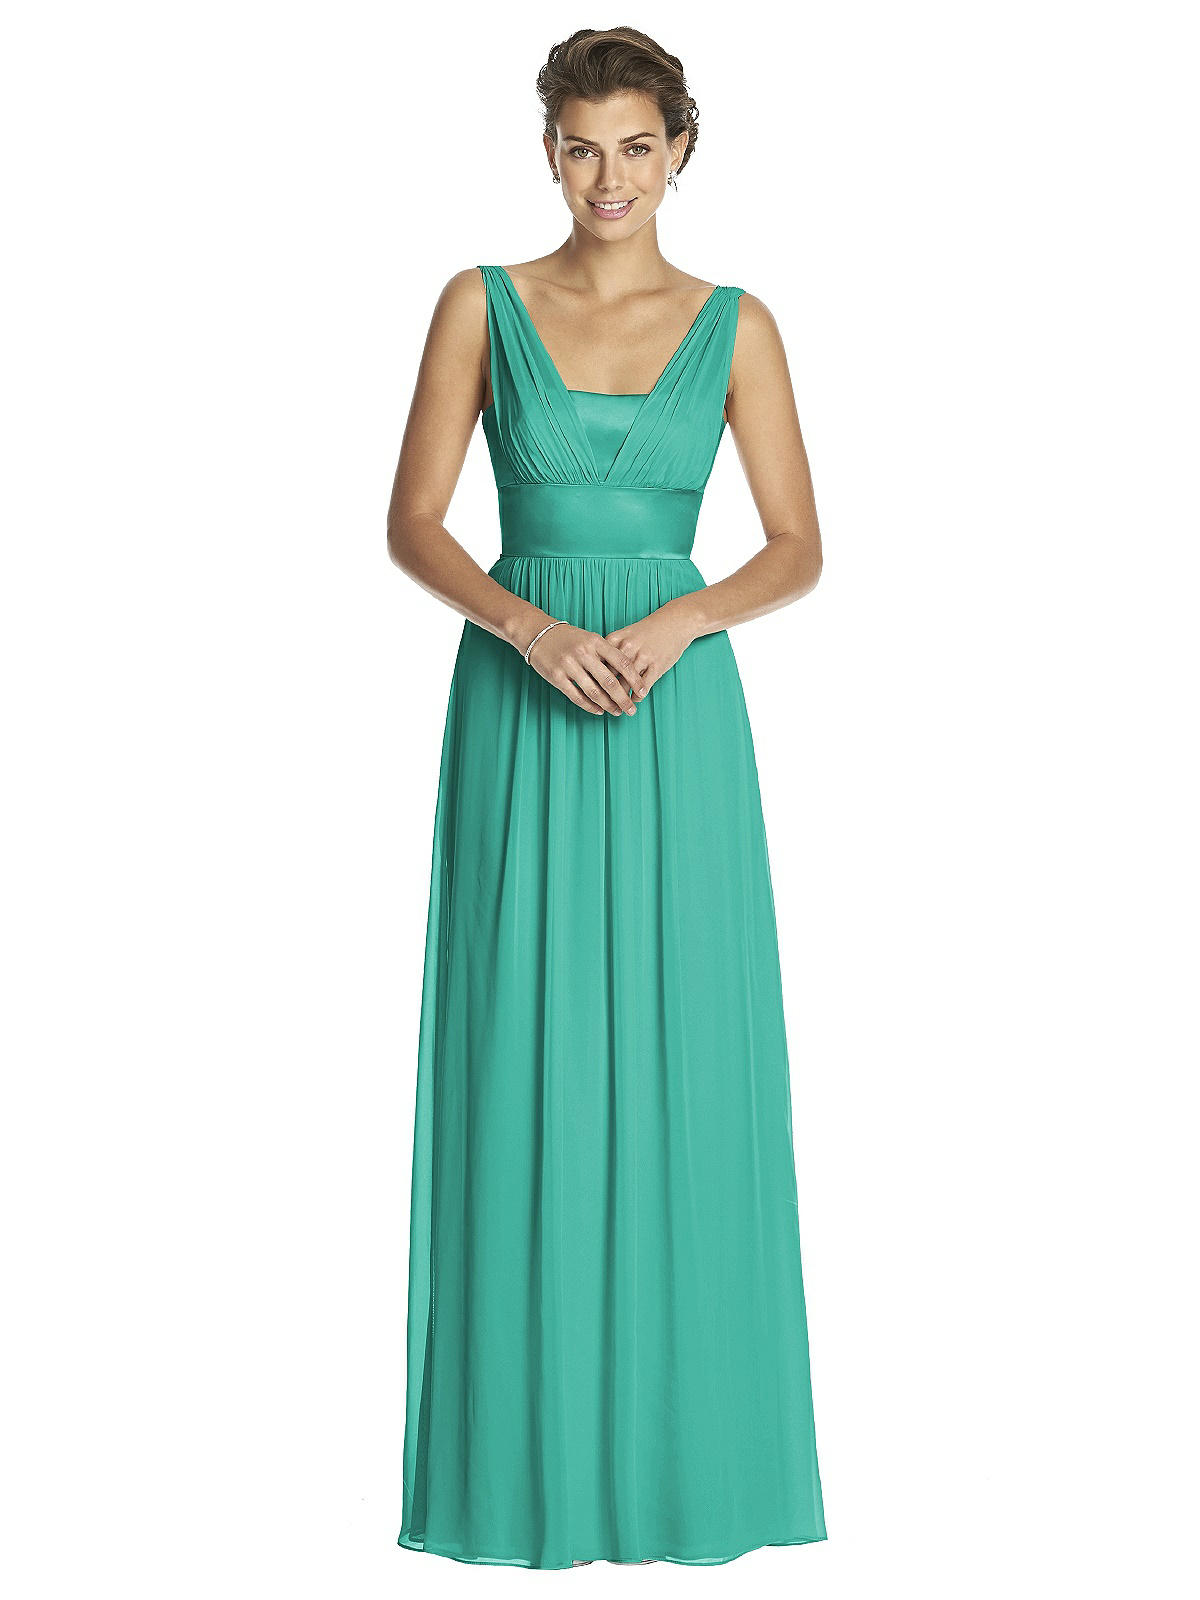 Dessy Collection Bridesmaid Dress Style 2890 | The Dessy Group